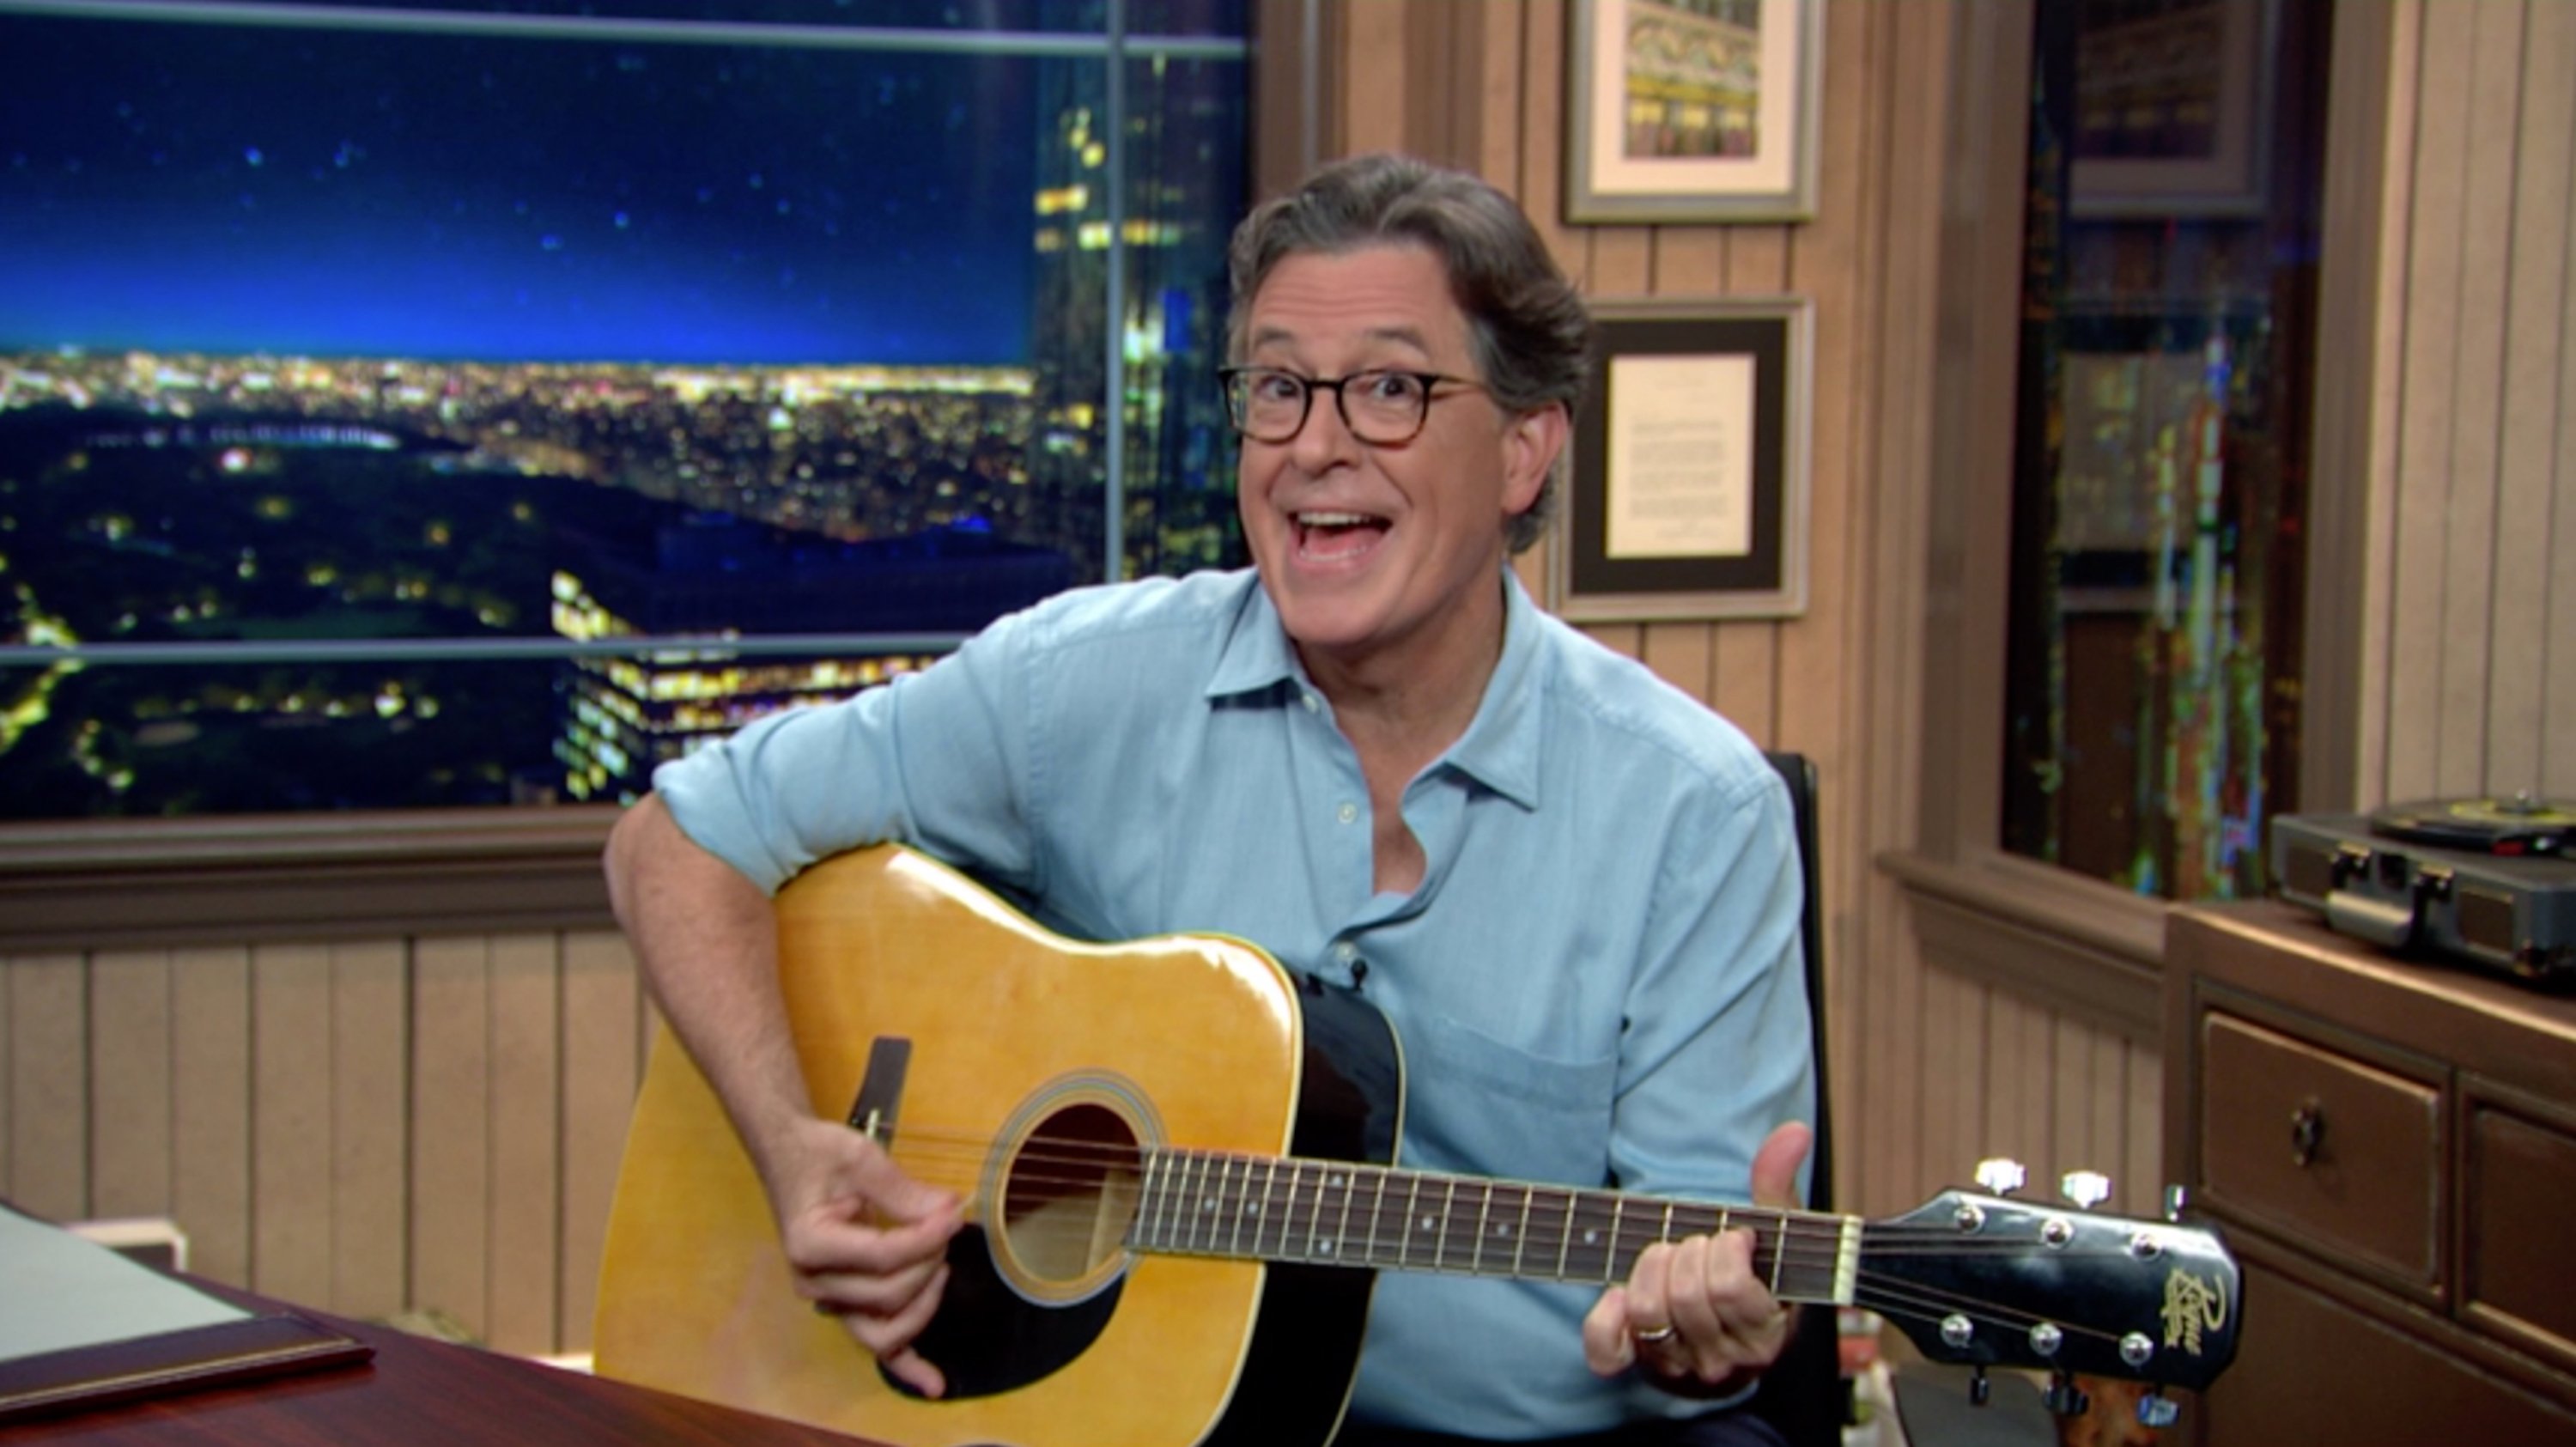 Stephen Colbert strums a guitar during a taping of his show, 'The Late Show with Stephen Colbert.'